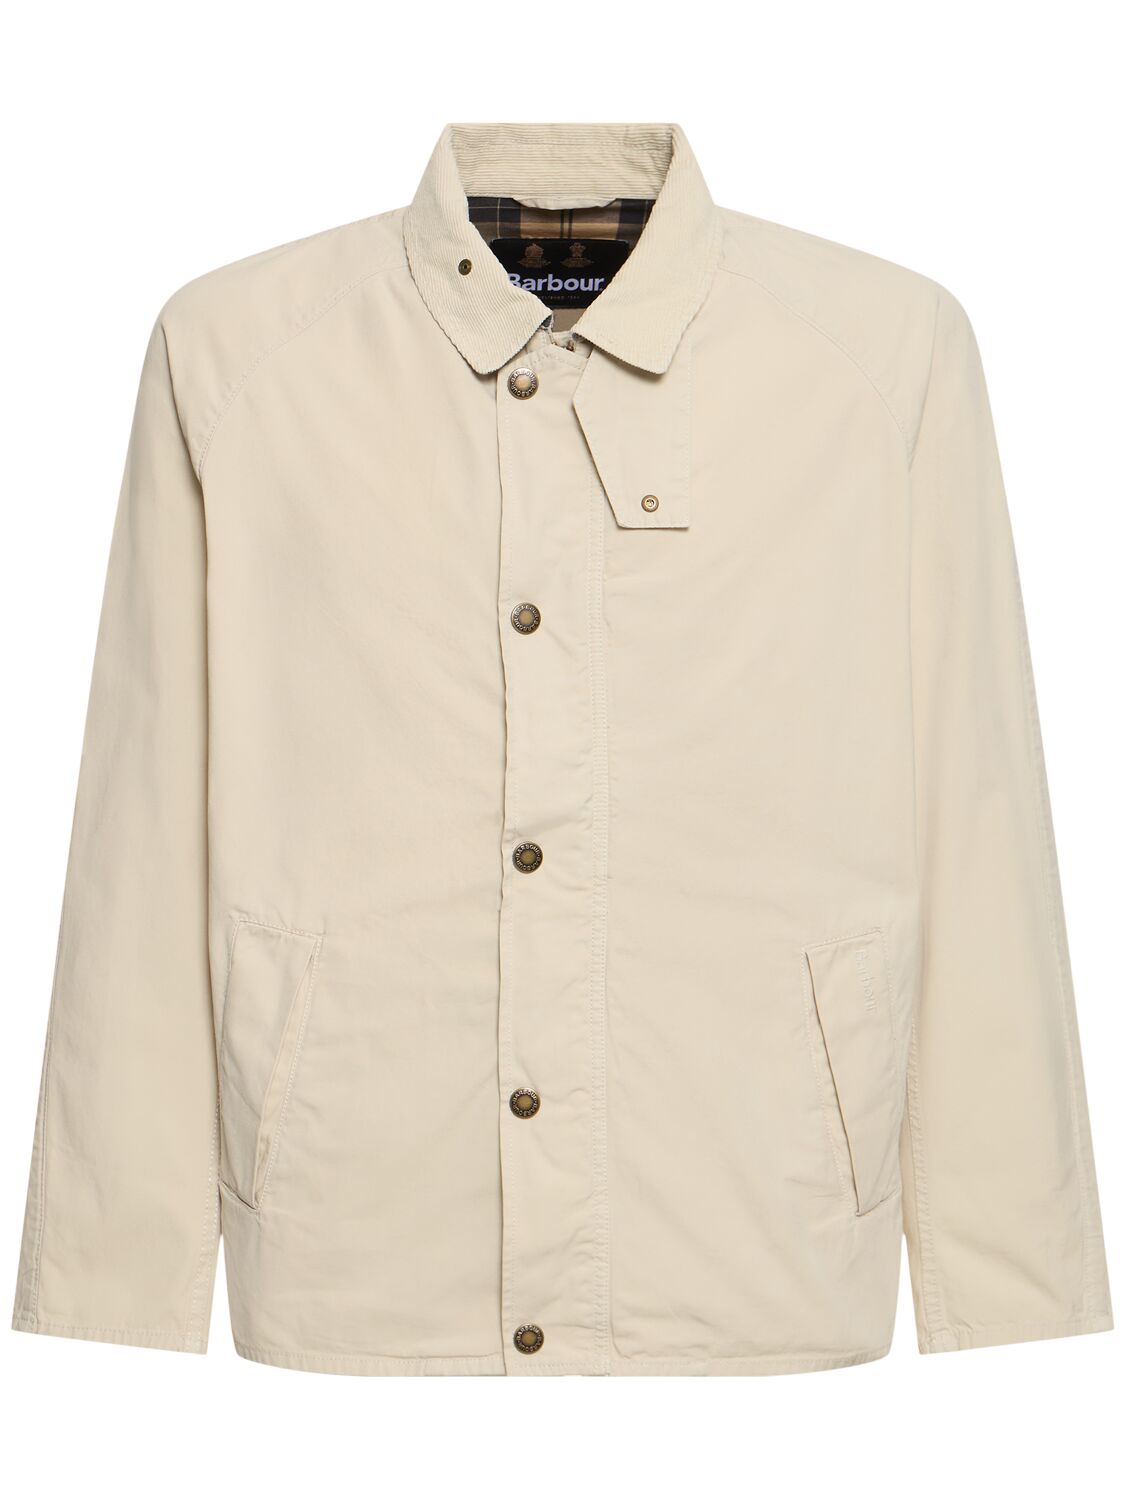 Barbour Tracker Cotton Jacket In Neutral